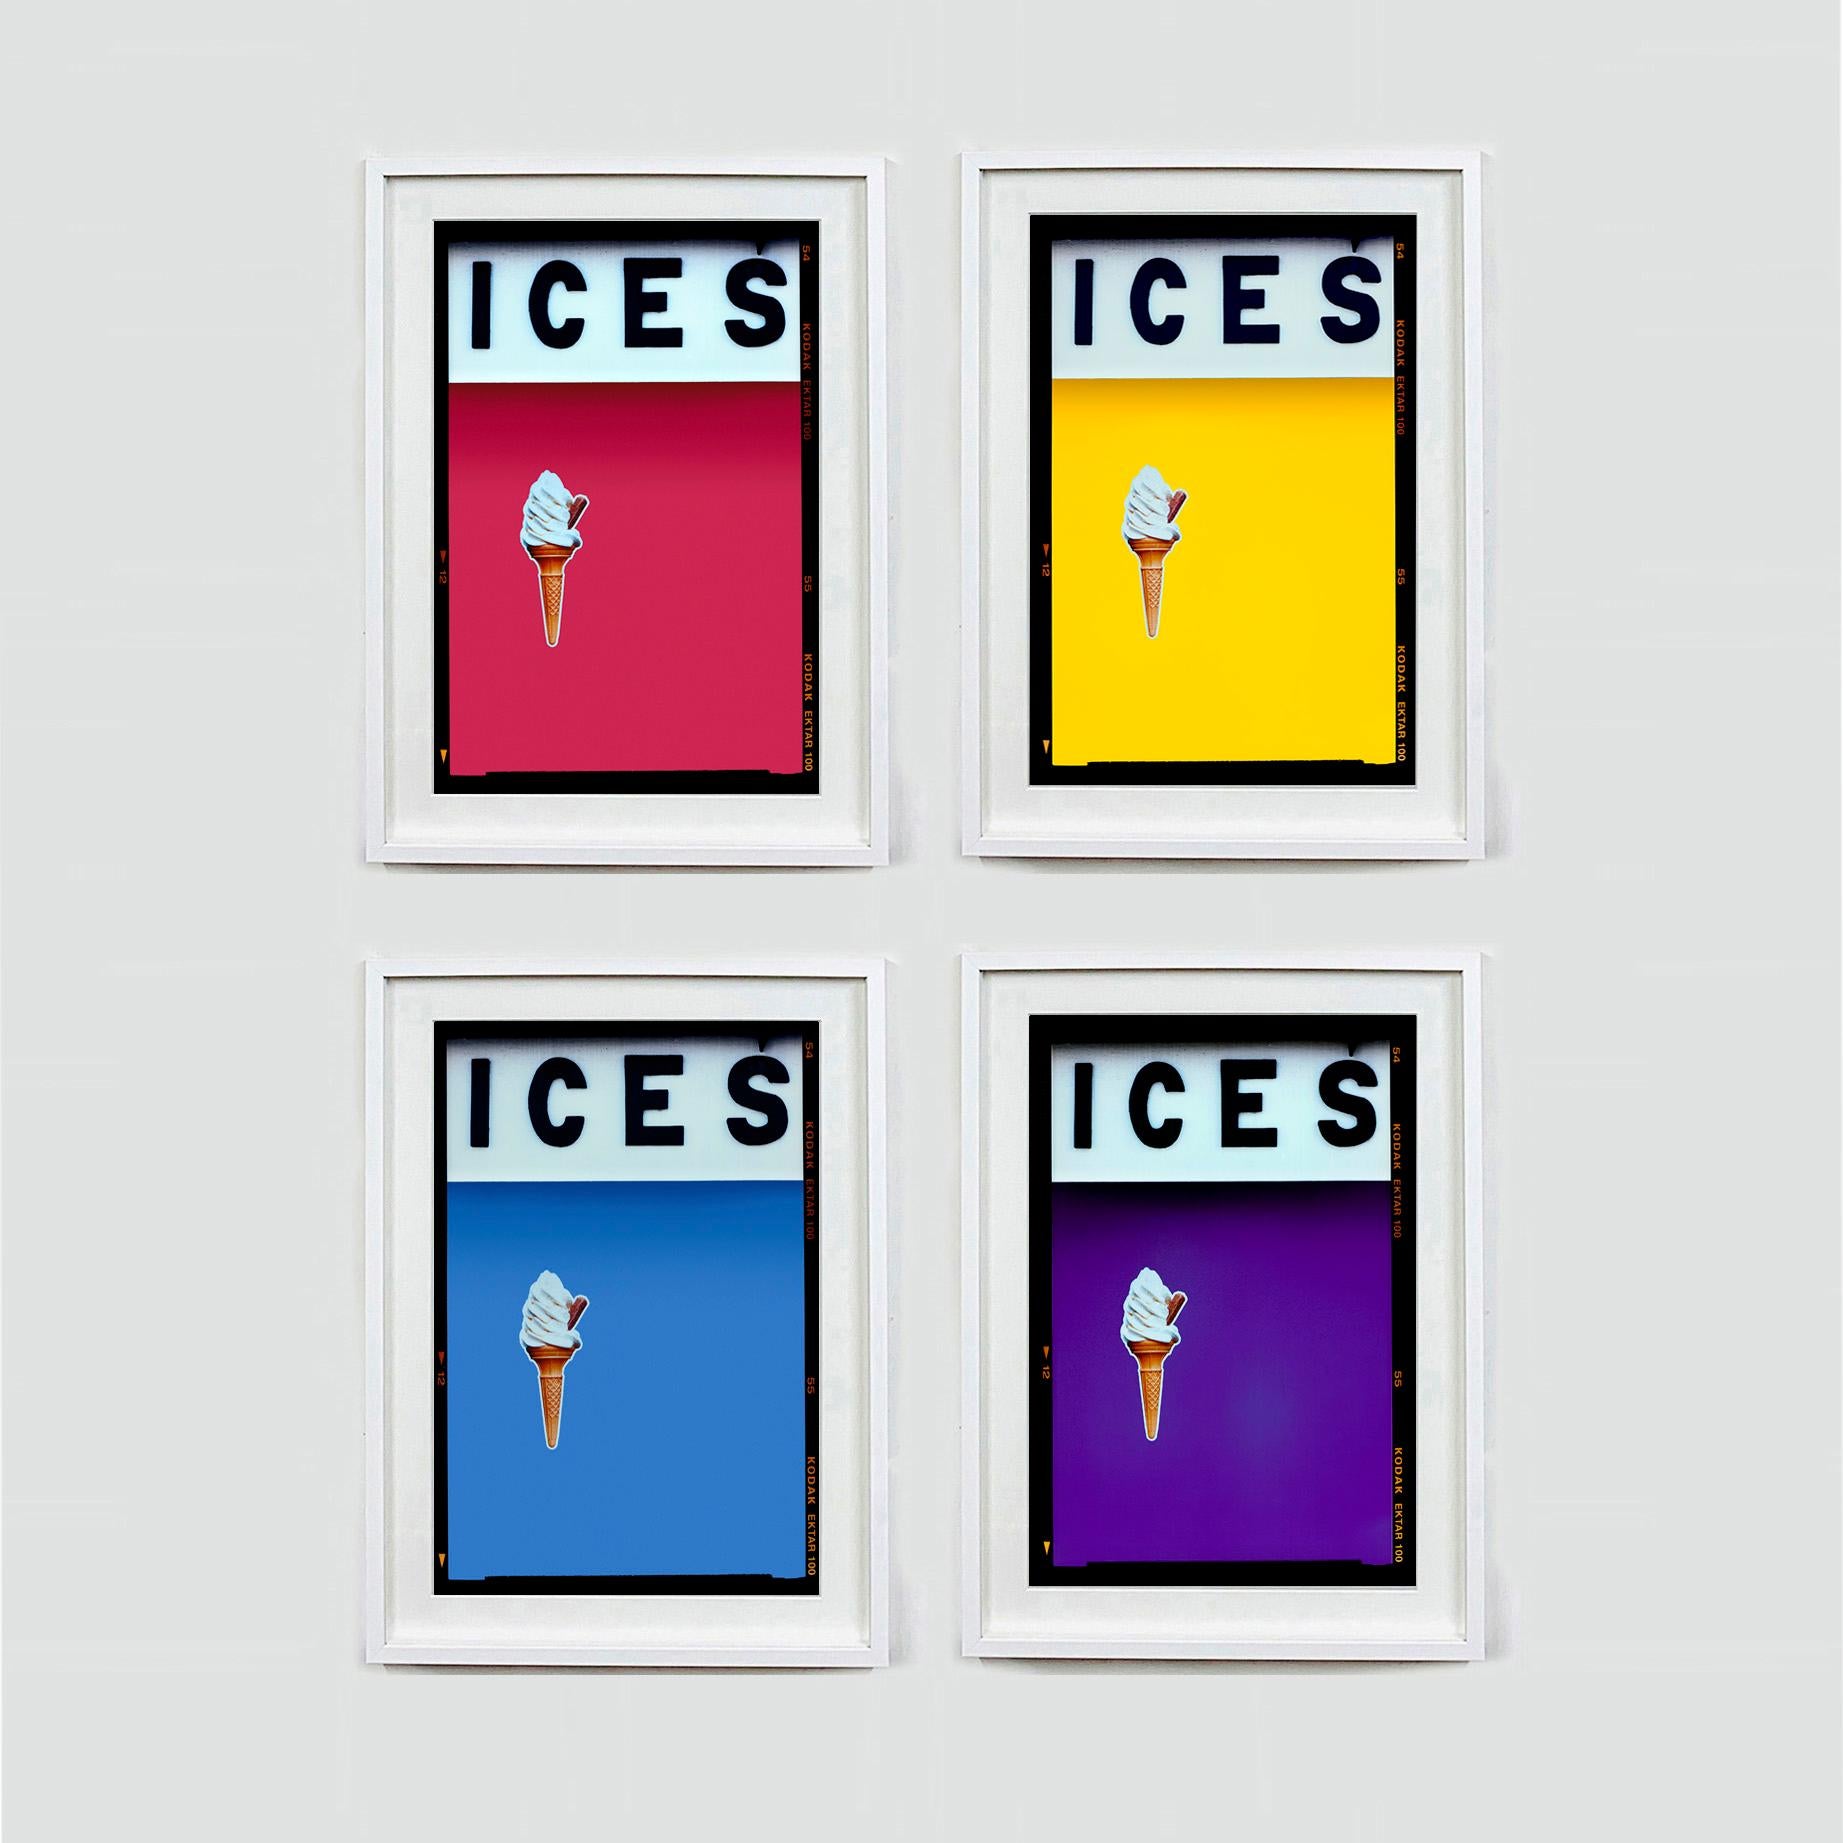 ICES, by Richard Heeps, photographed at the British Seaside at the end of summer 2020. This artwork is about evoking memories of the simple joy of days by the beach. The baby blue color blocking, typography and the surreal twist of the suspended ice